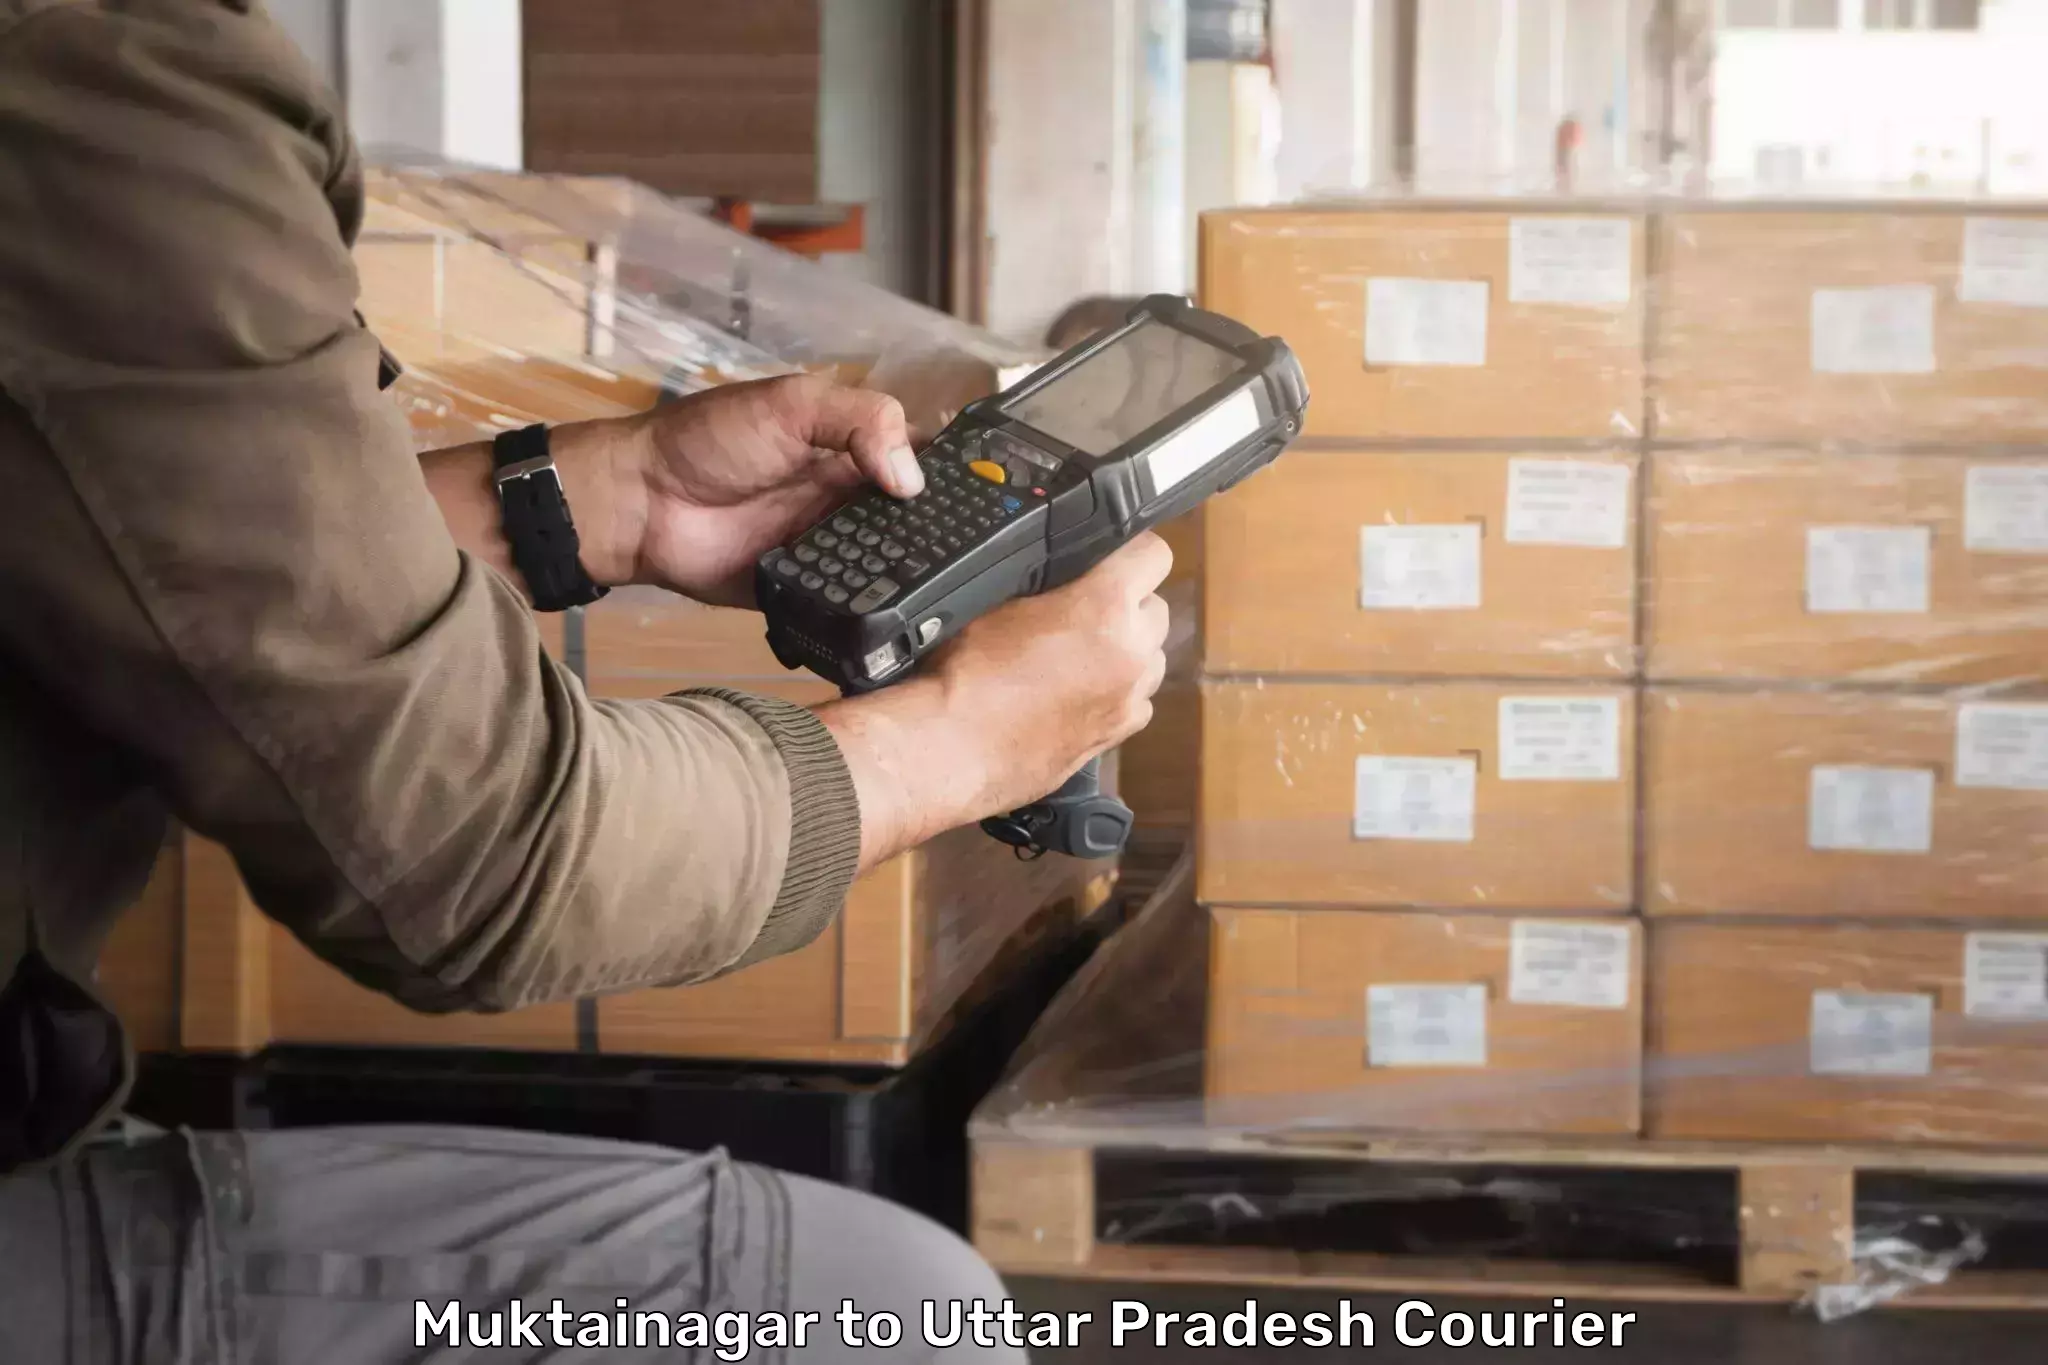 Secure packaging Muktainagar to Fatehabad Agra